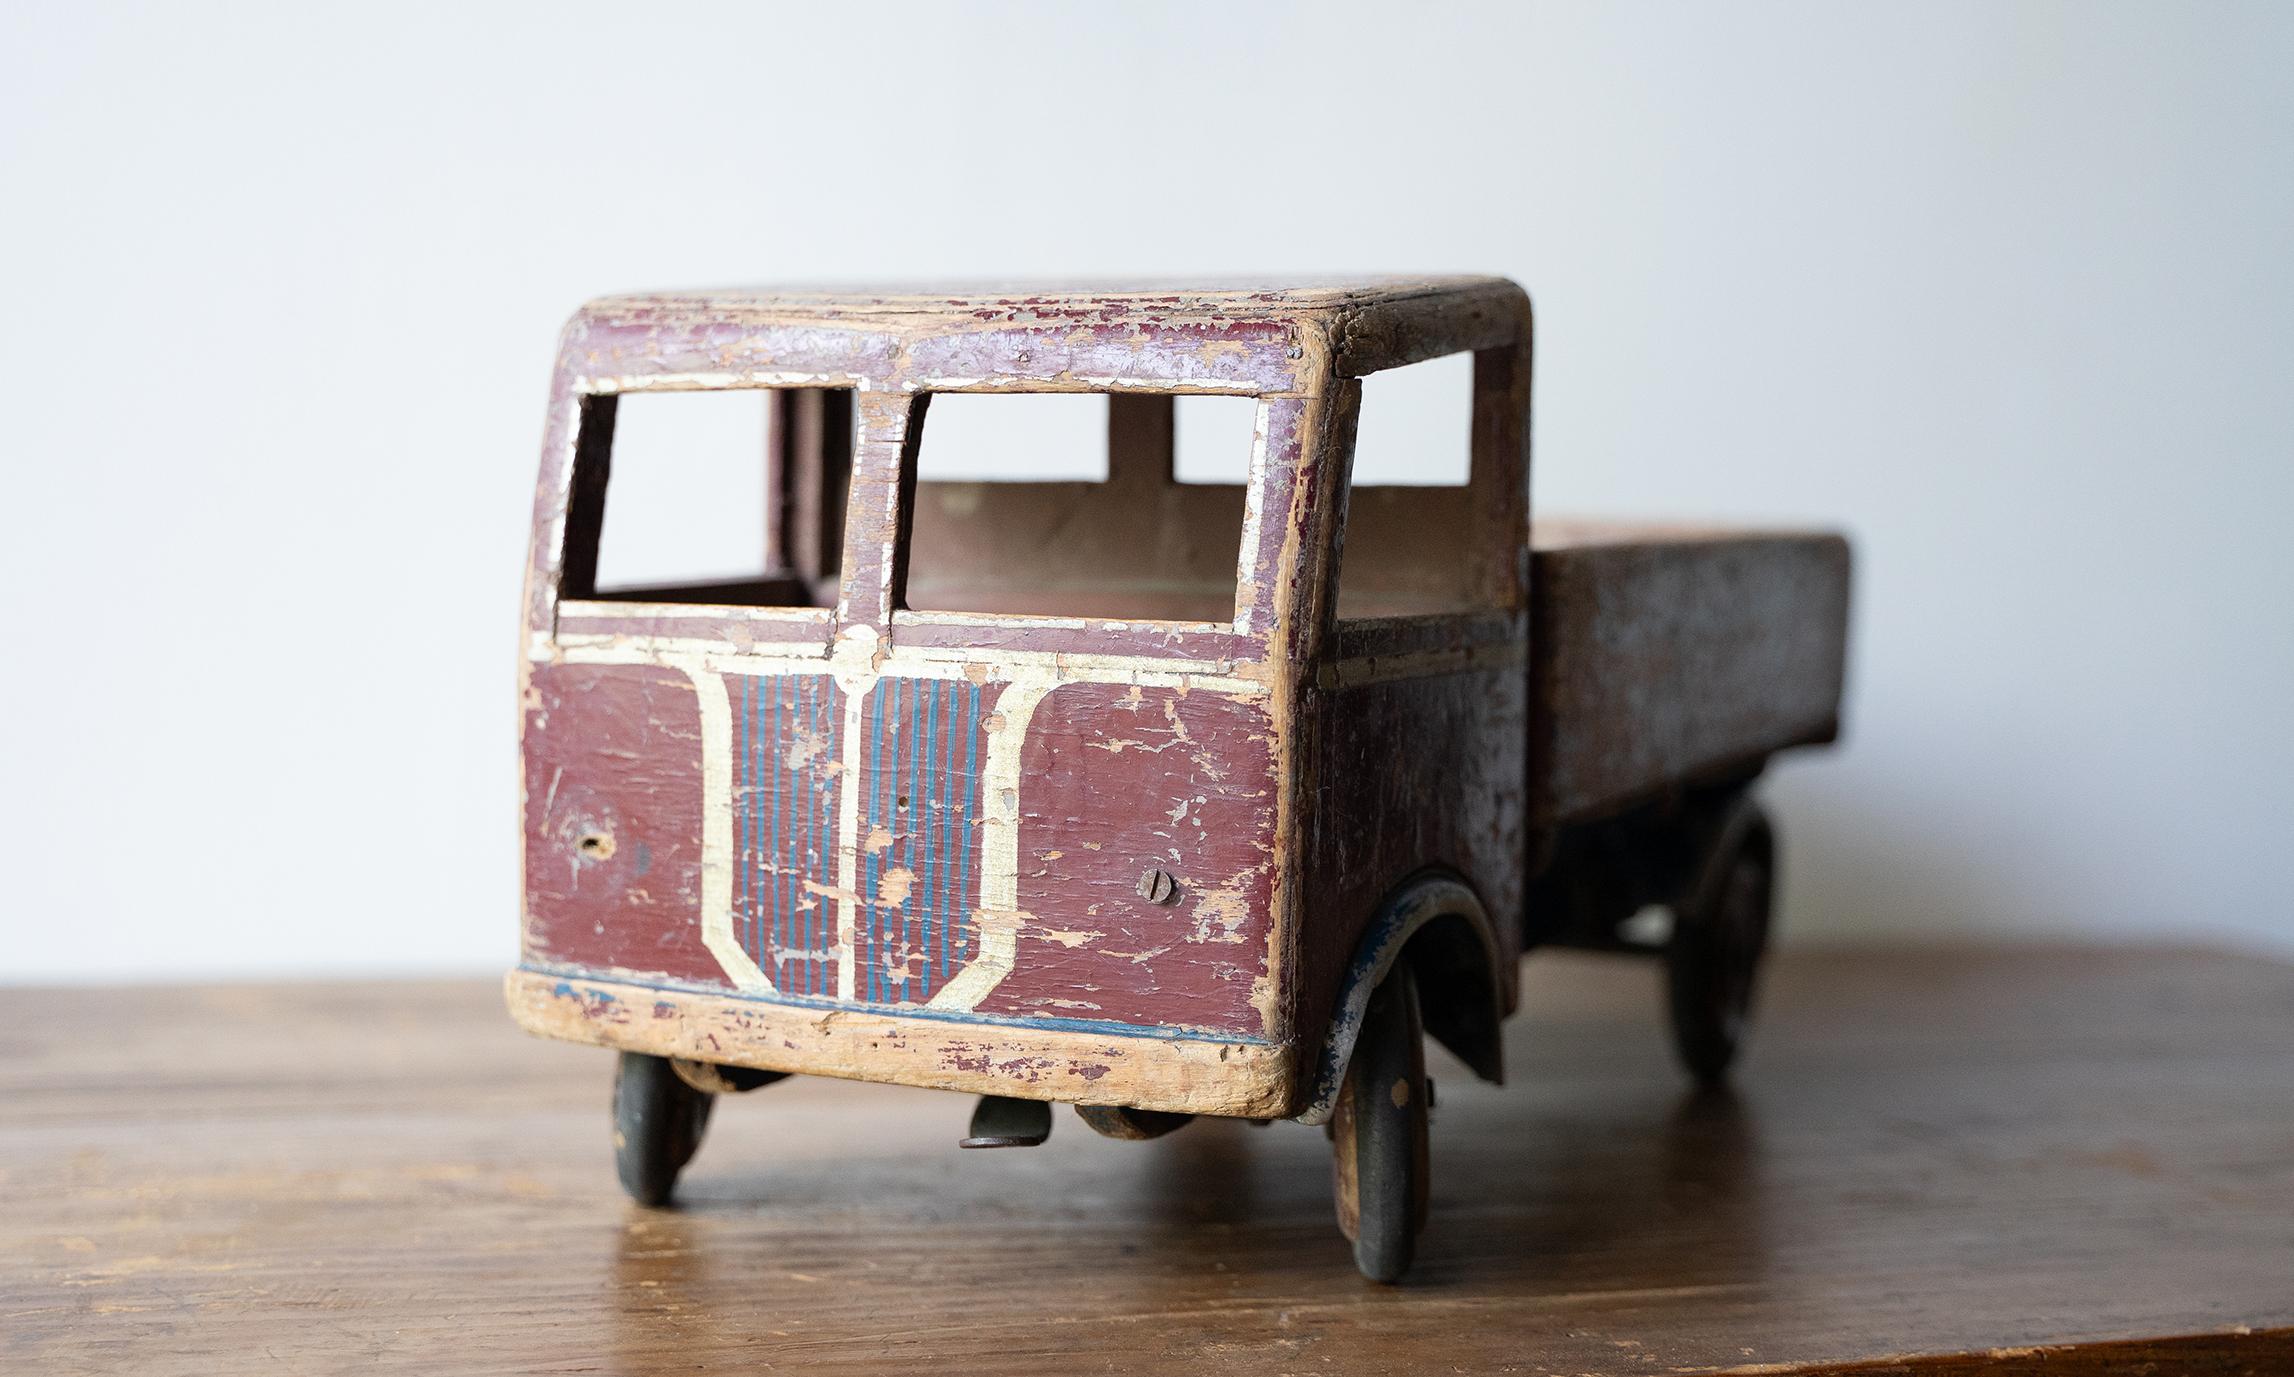 Antique Toy Truck
Era: 1920s
Origin: Italy - Siena
Dimensions: 22x22x52 cm
Material: Lacquered wood
Description: Beautiful and original antique toy truck, dating from the 1920s, with a very well-preserved original wooden lacquer finish. All parts